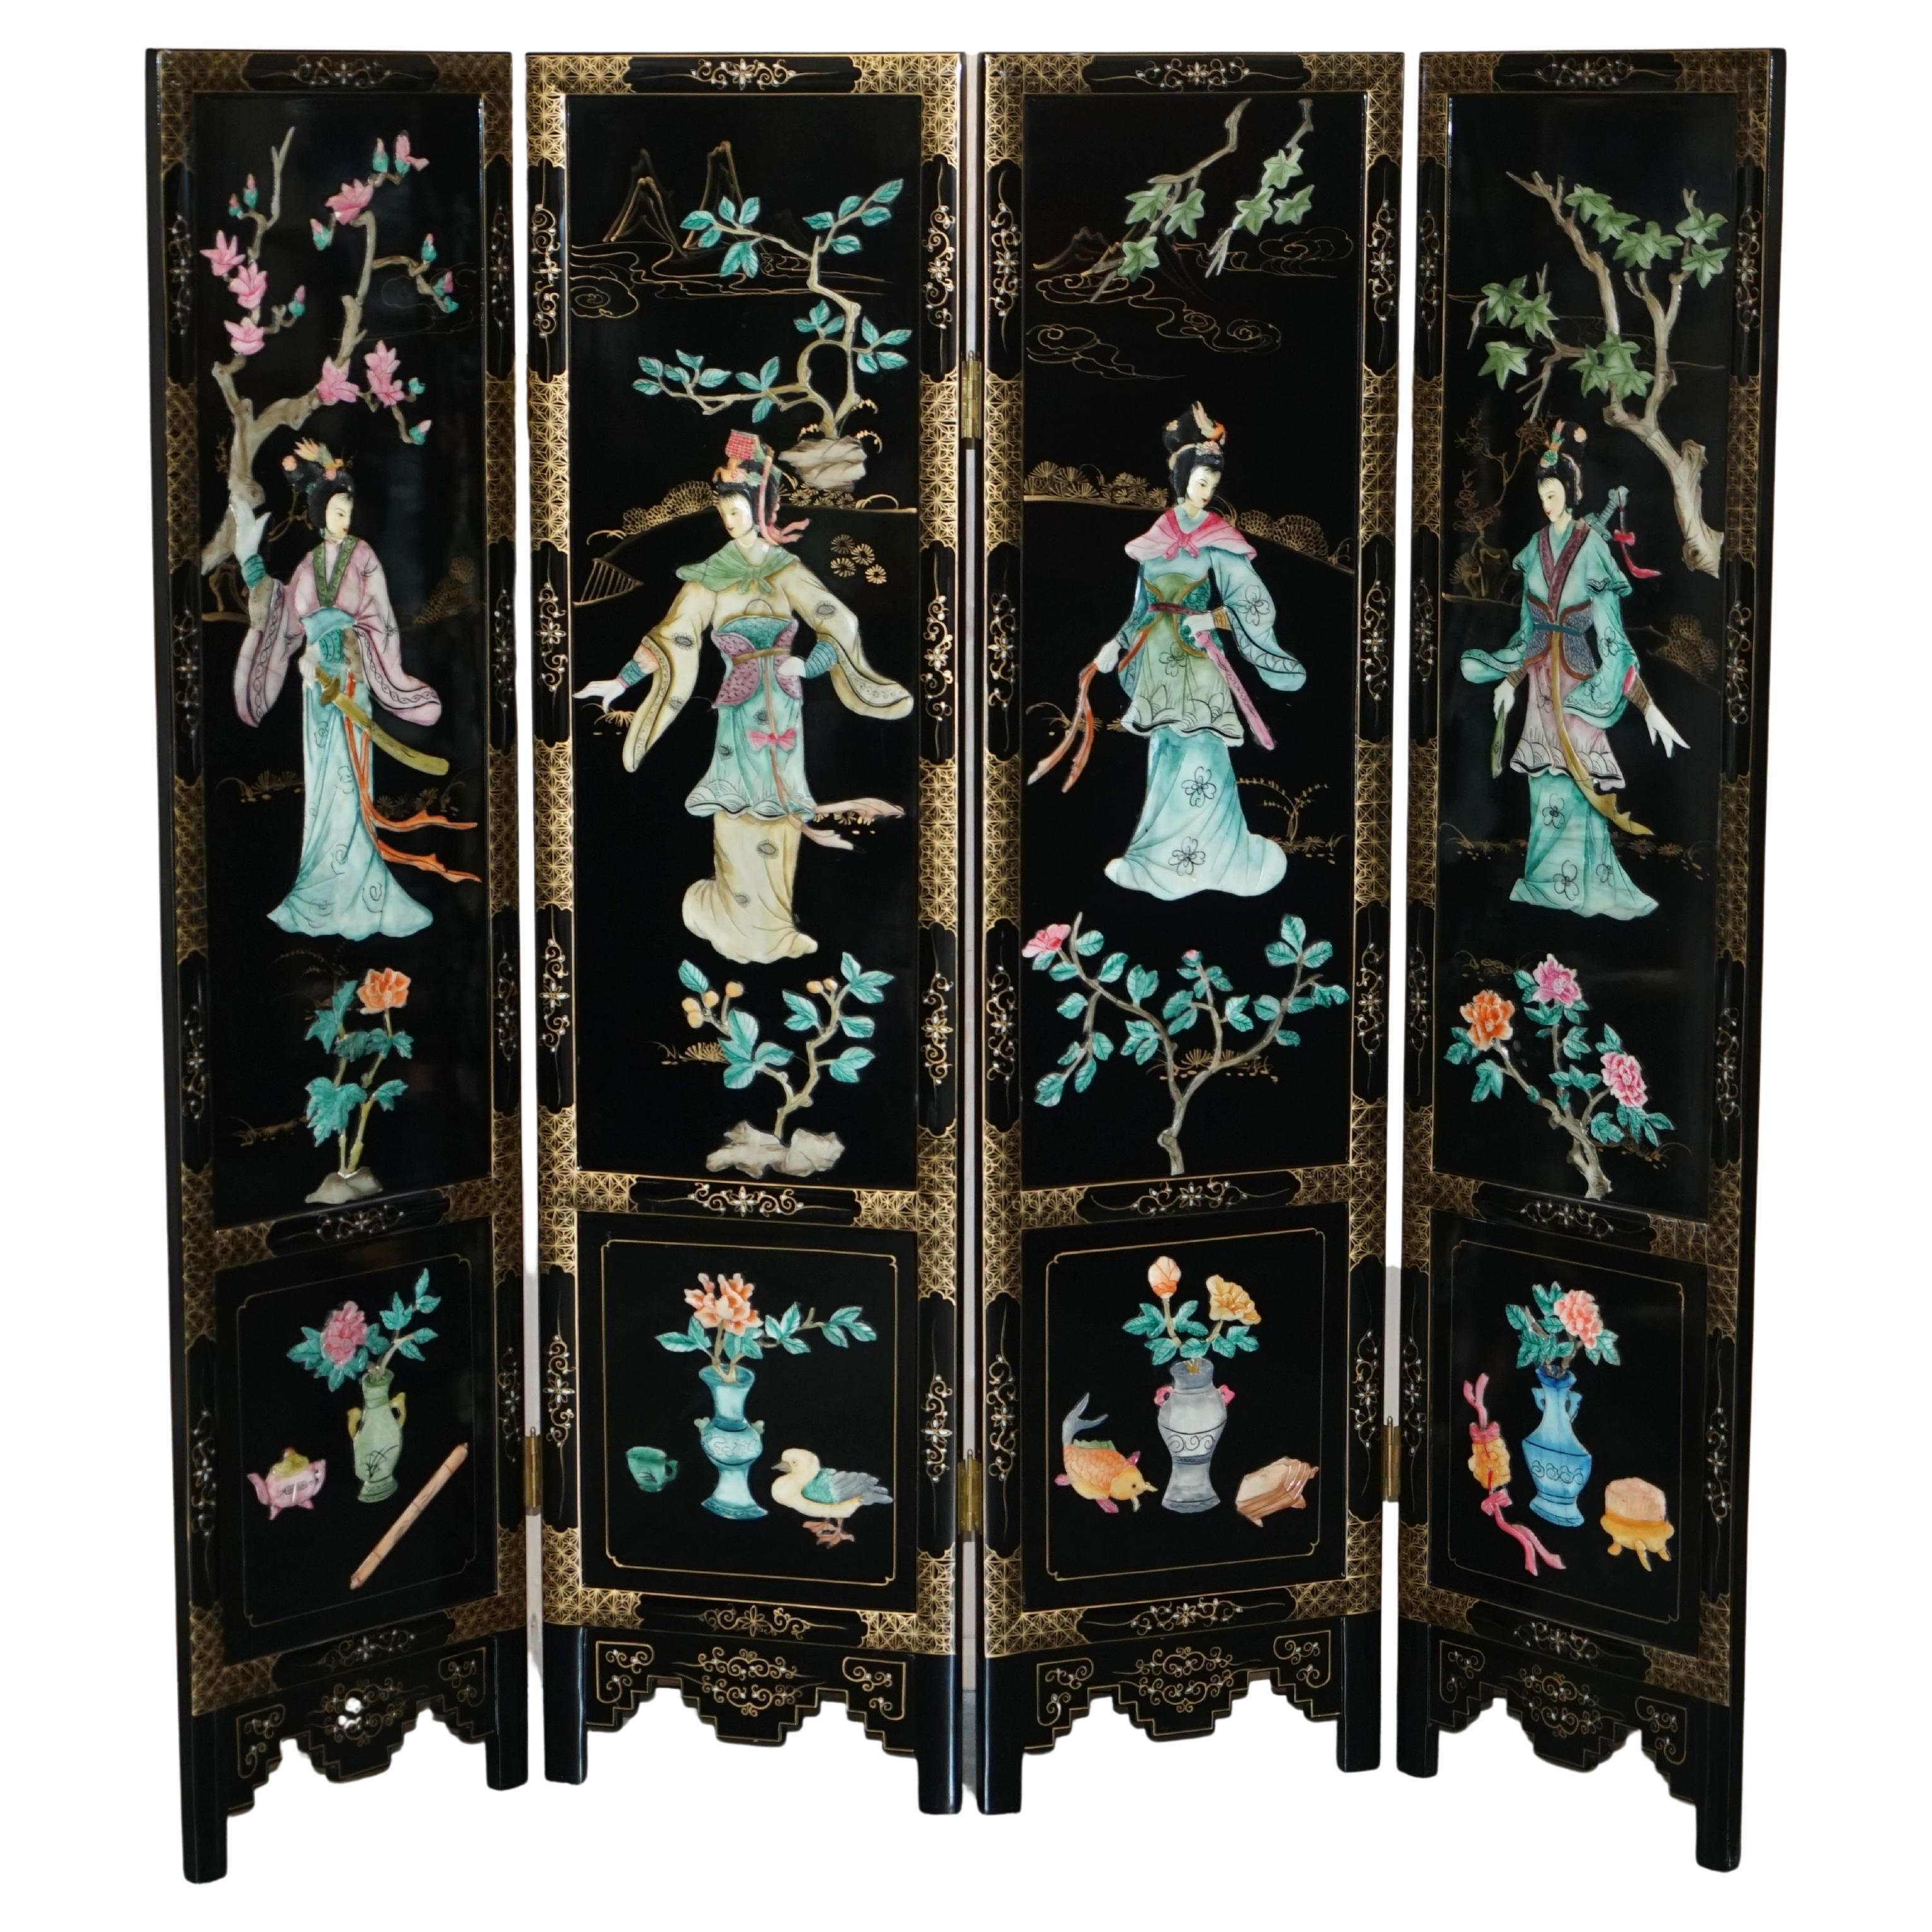 FINE & COLLECTABLE ANTiQUE CHINESE EXPORT SOAPSTONE FOLDING SCREEN ROOMS DIVIDER